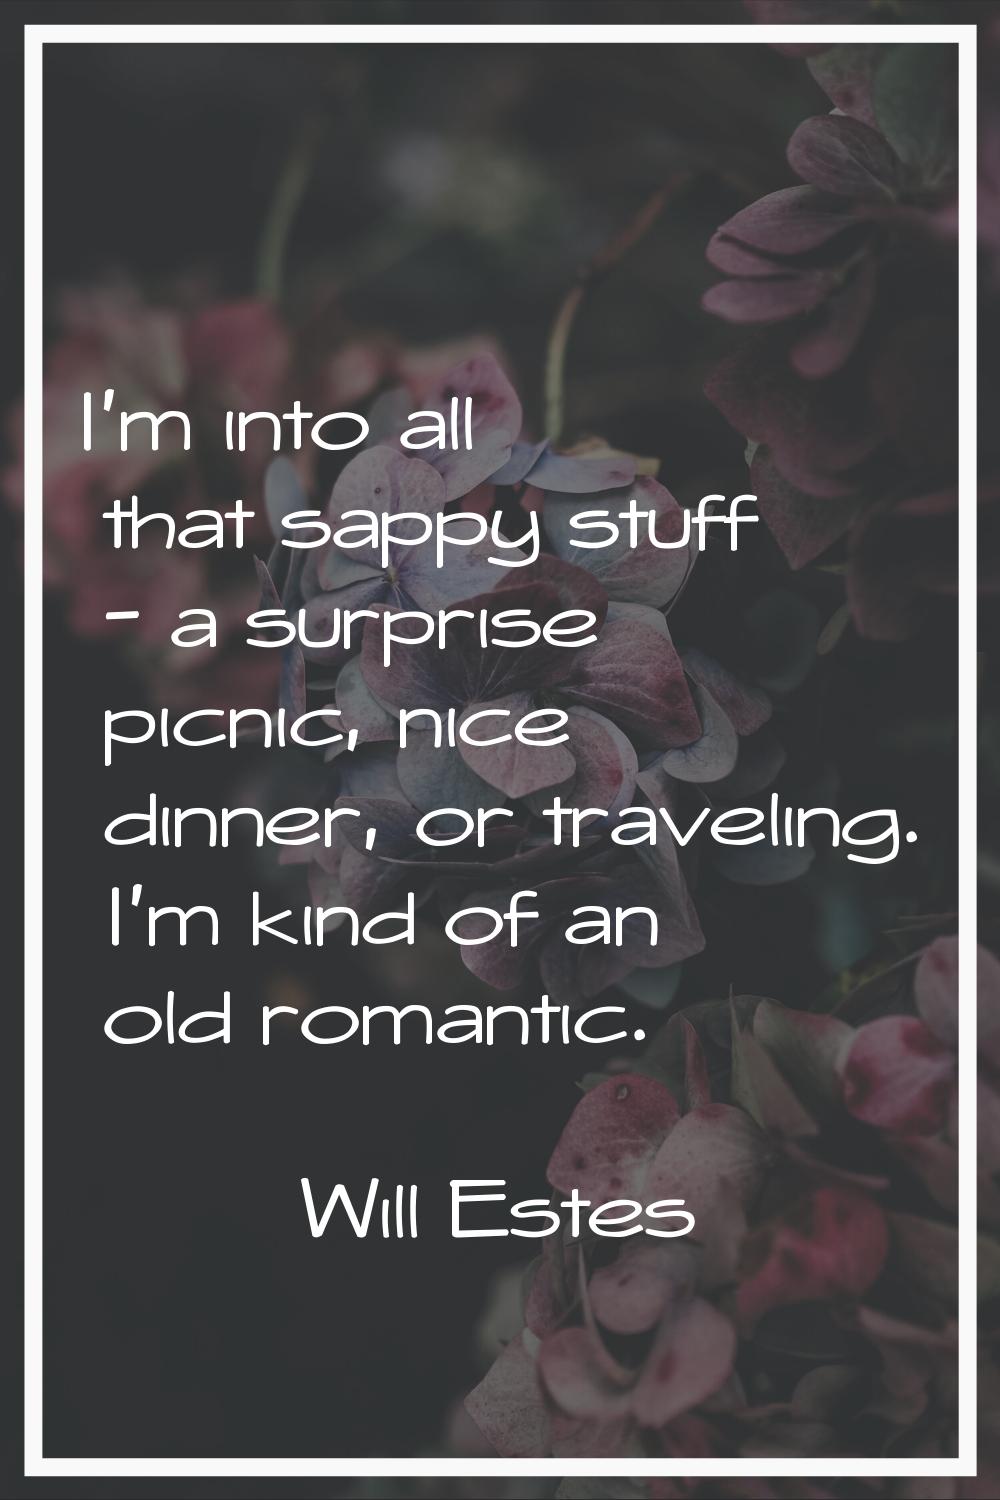 I'm into all that sappy stuff - a surprise picnic, nice dinner, or traveling. I'm kind of an old ro